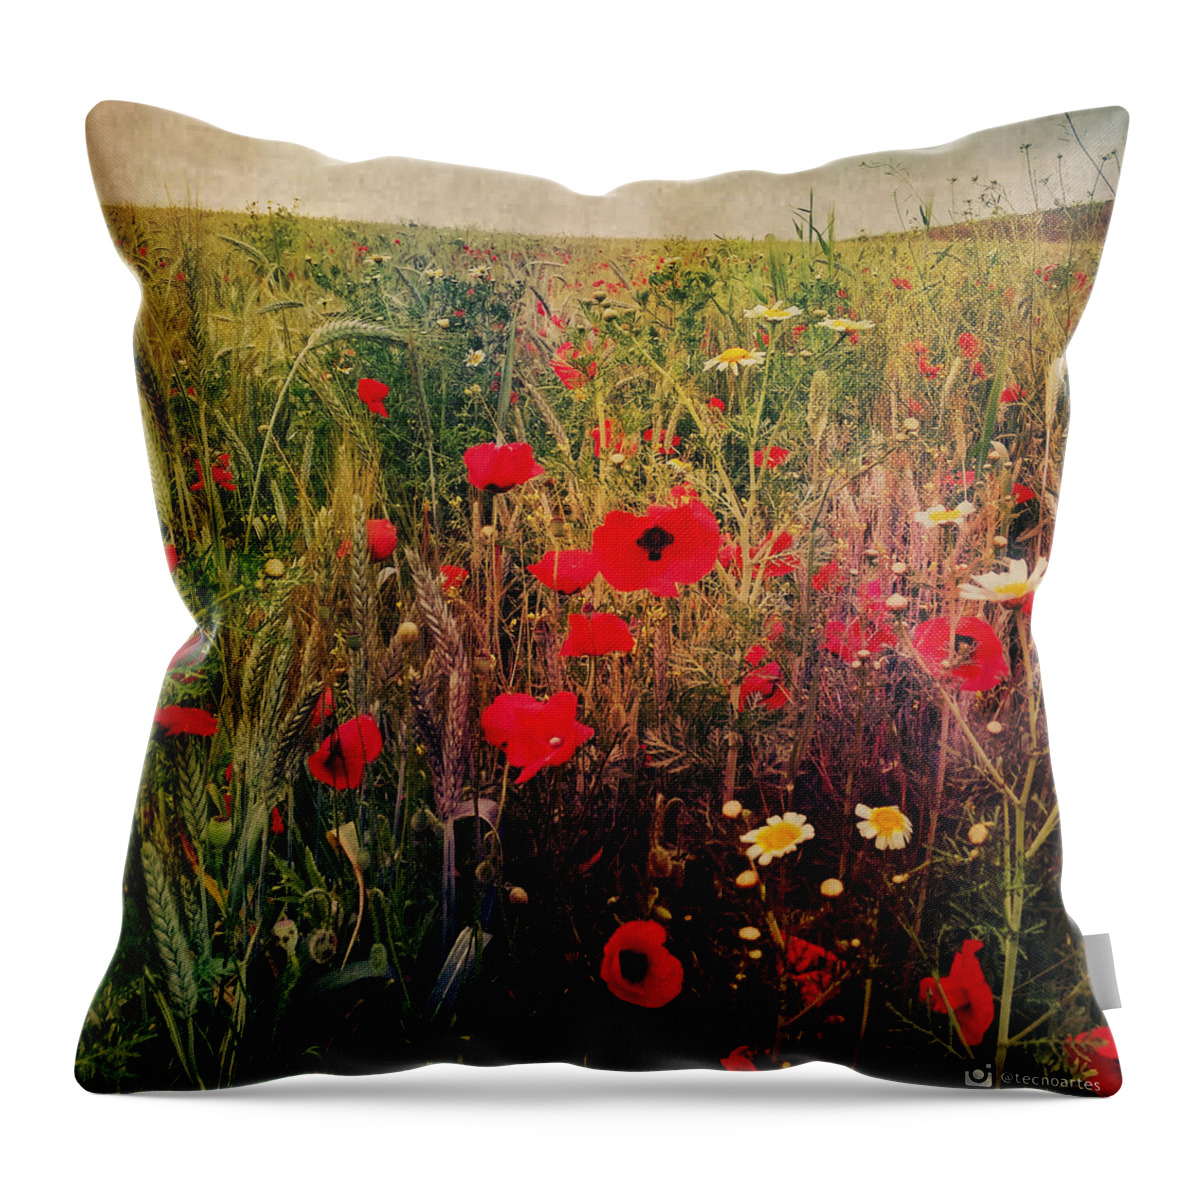 Poppies Throw Pillow featuring the photograph Poppies Fiel by Miguel Angel